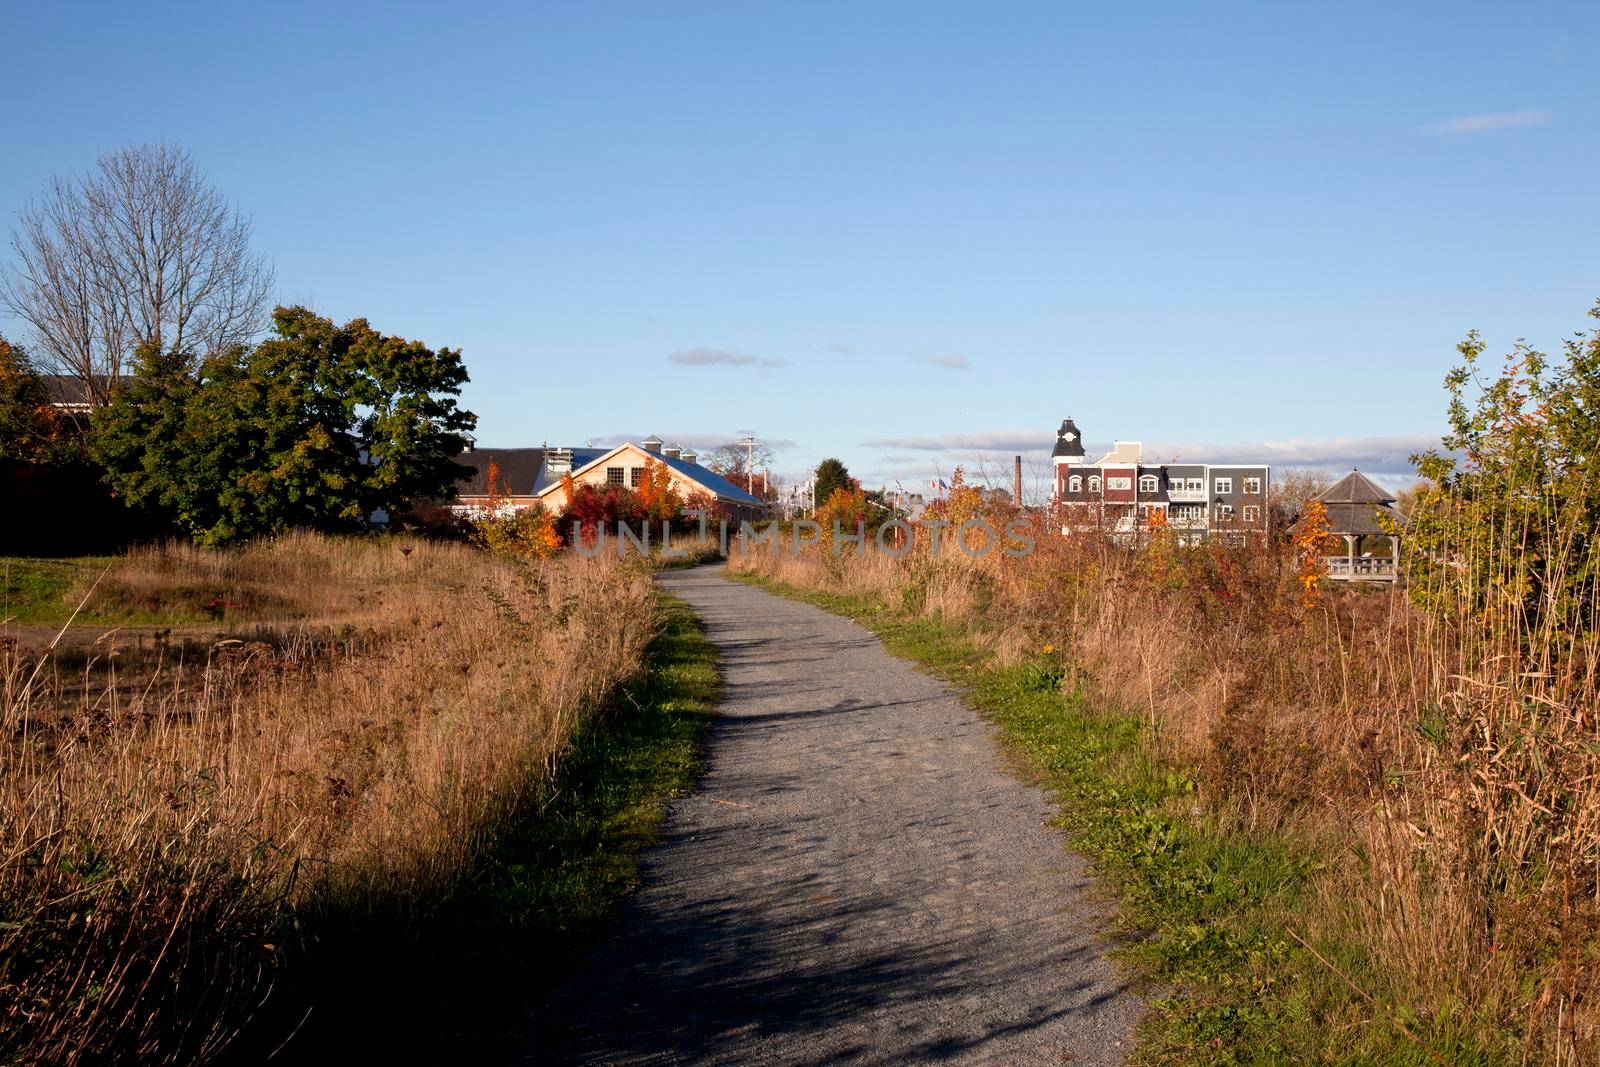 Wolfville, Nova Scotia- October 23, 2012: The path across the dykes in Wolfville leading to the waterfront park and Railtown 